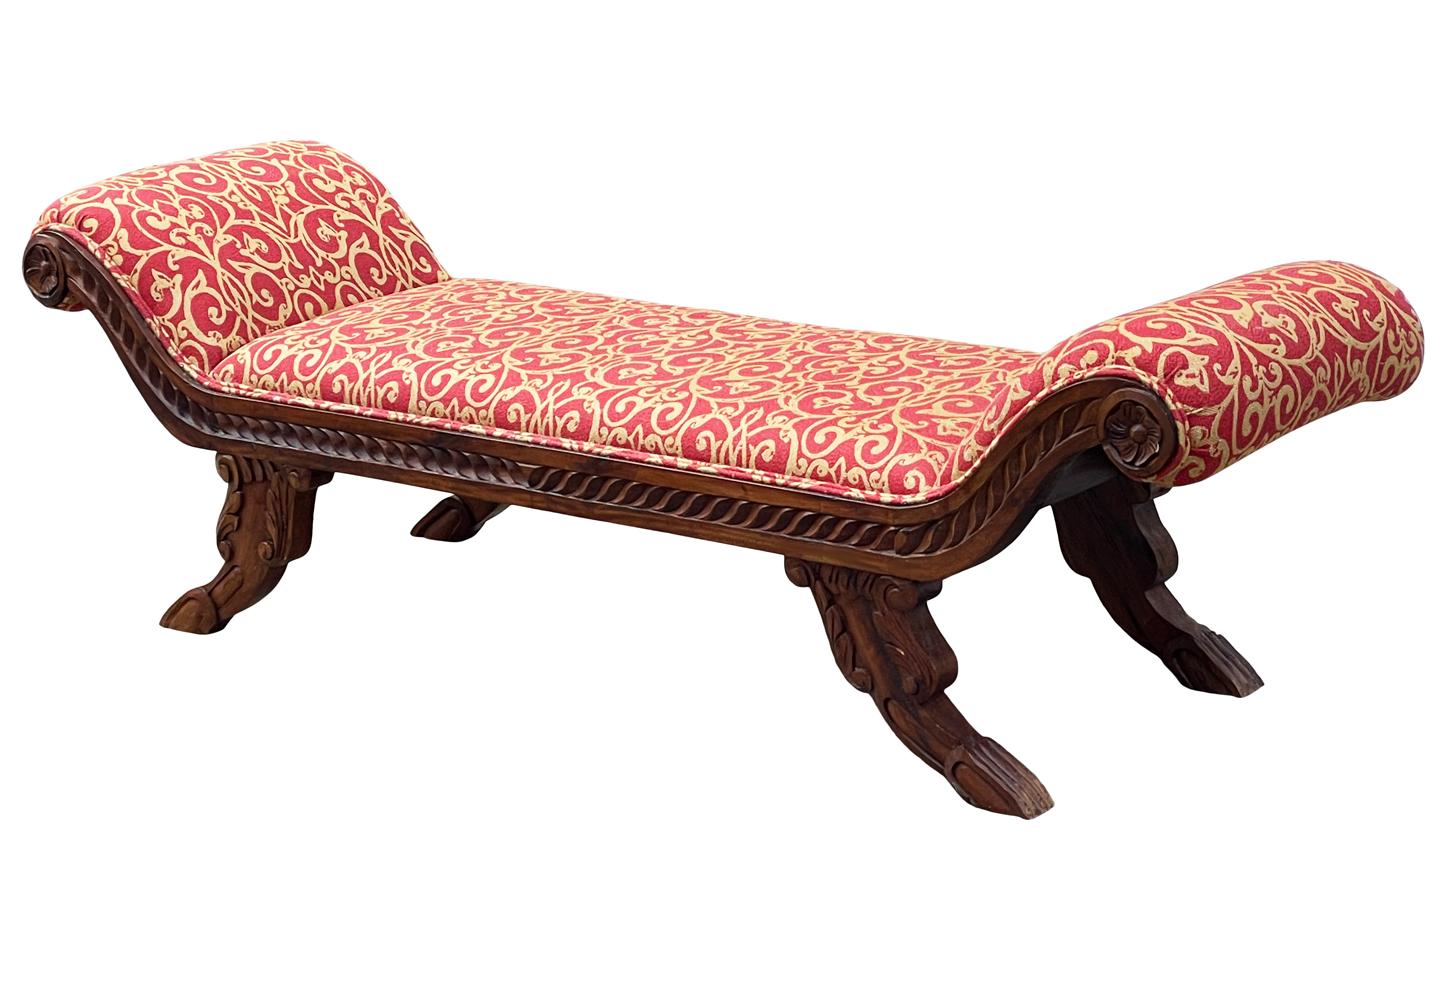 Fabric Long Vintage Italian Style Carved Wood Bench with Upholstered Seat  For Sale